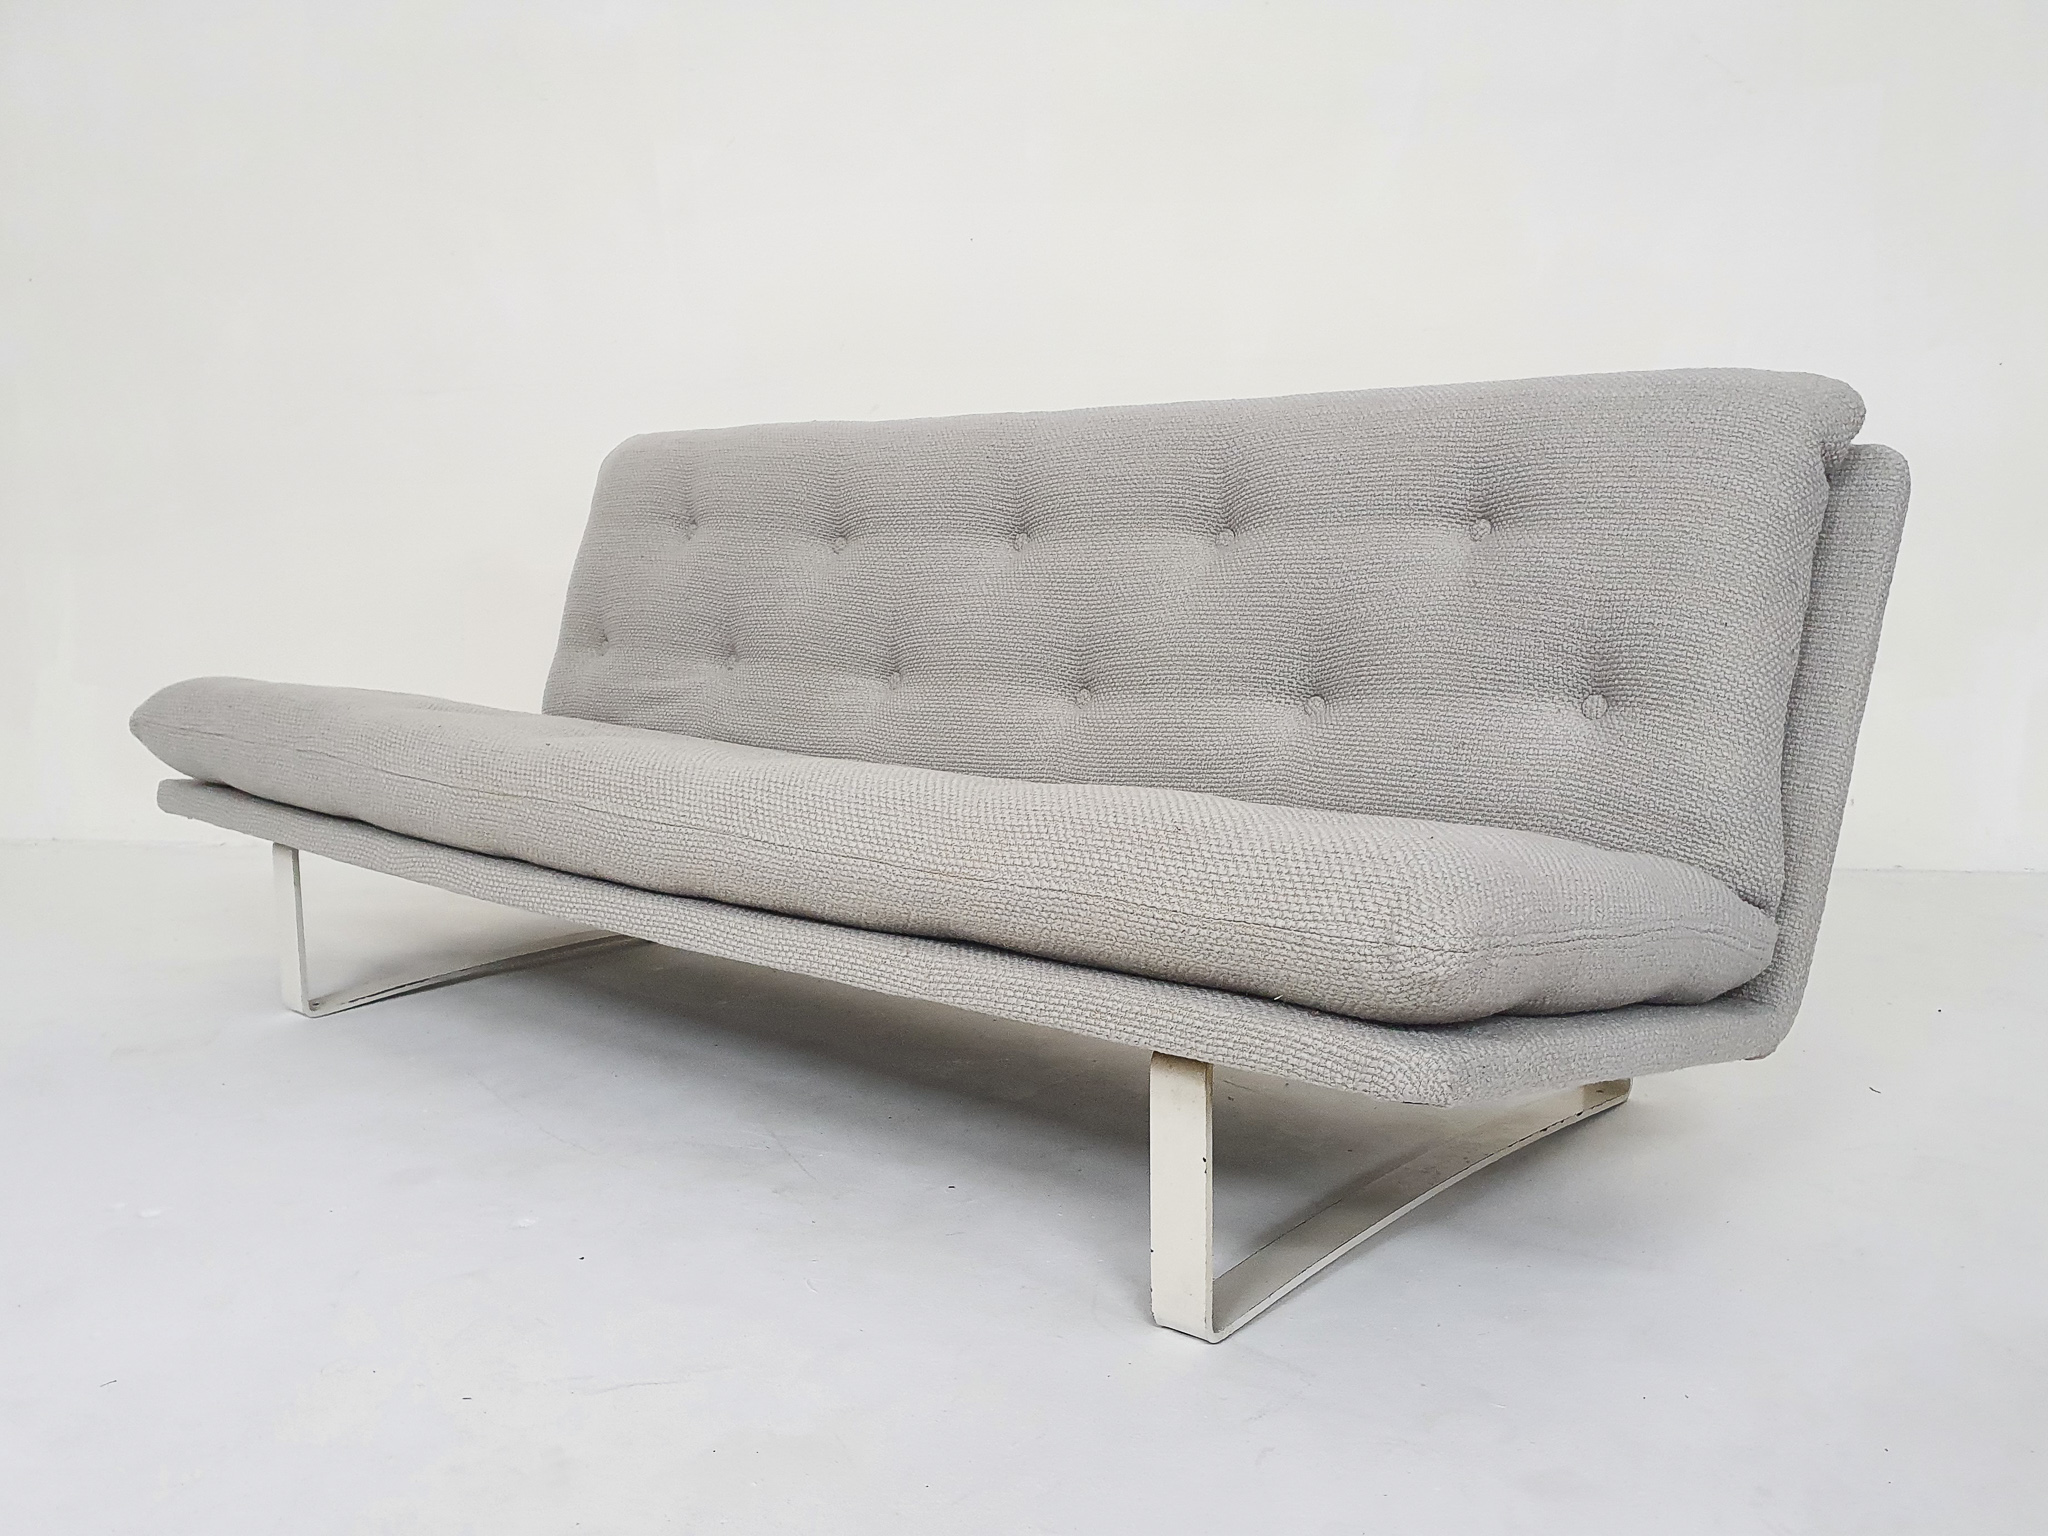 Buy Oud | Zo Design at Als Sofas Seating Goed Vintage